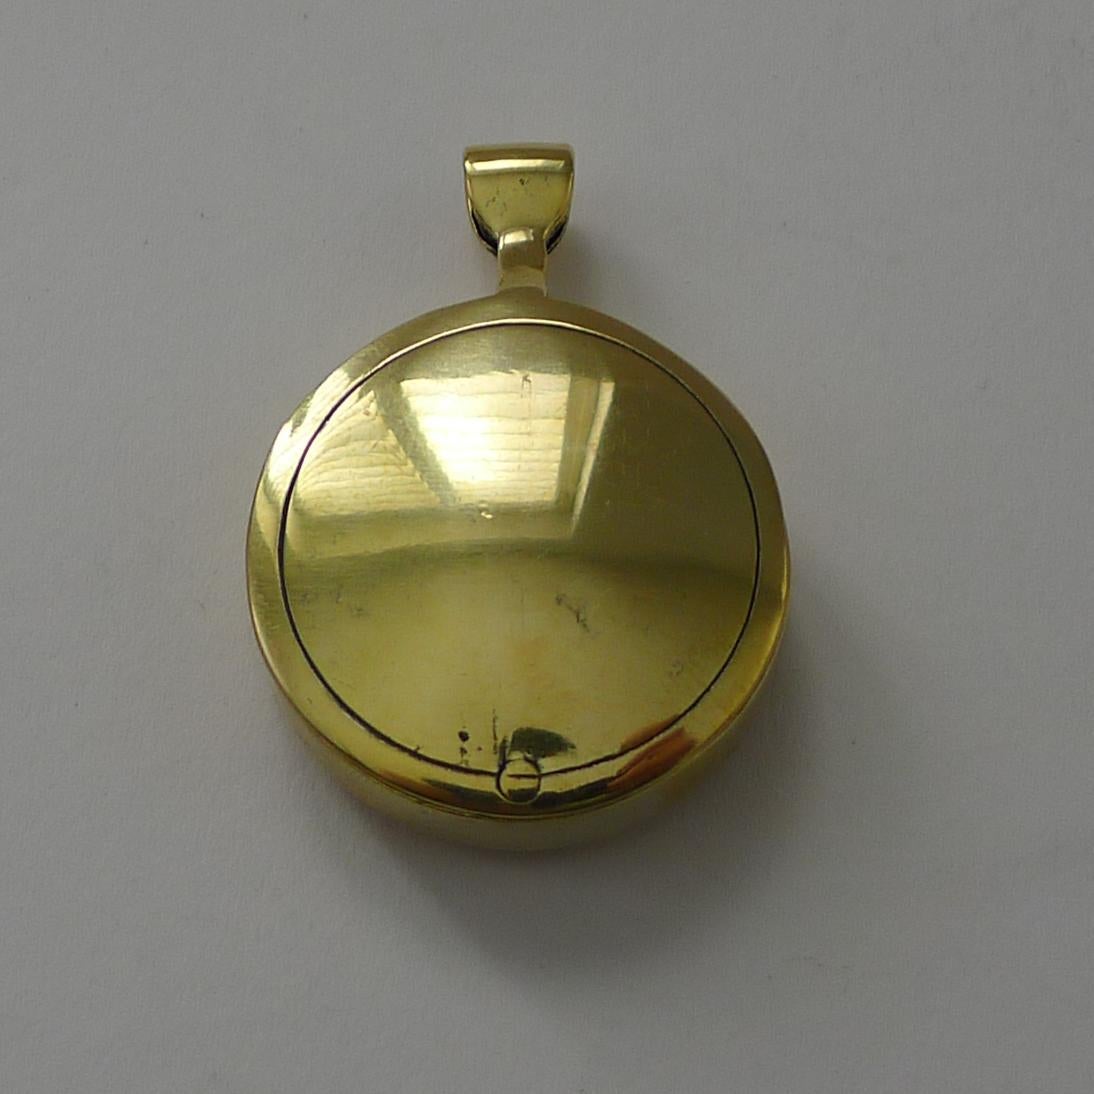 A brass folding pocket compass which is made also to be added to a chain or ribbon to be worn around the neck.

The lens has a good magnification and in lovey condition.

Dating to c.1910, the brass case has been professionally cleaned.  Excellent